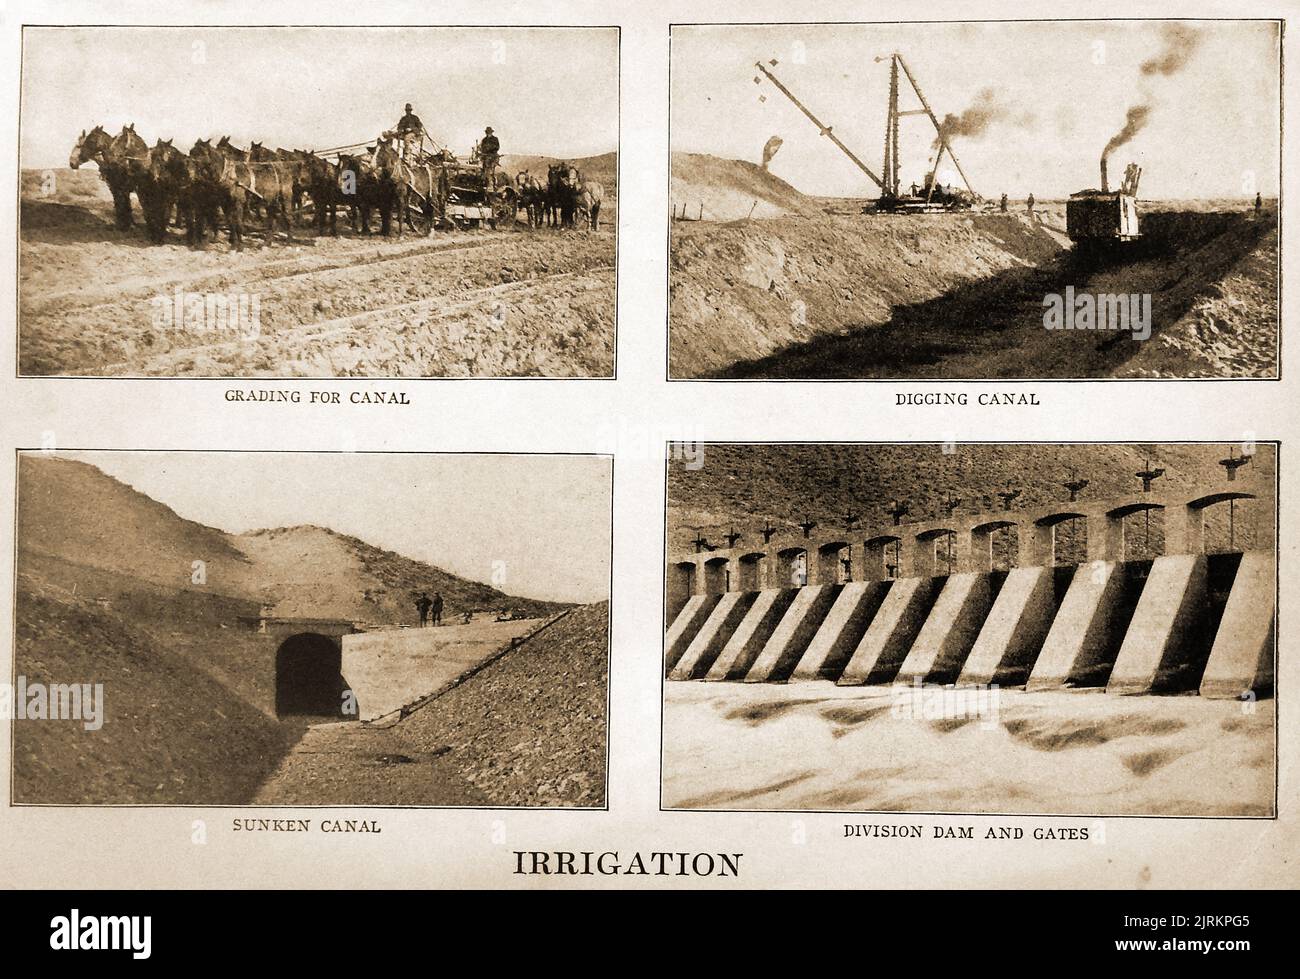 A vintage British illustration showing 4 stages in the construction of a dam using basic  equipment including horse-drawn carts Stock Photo